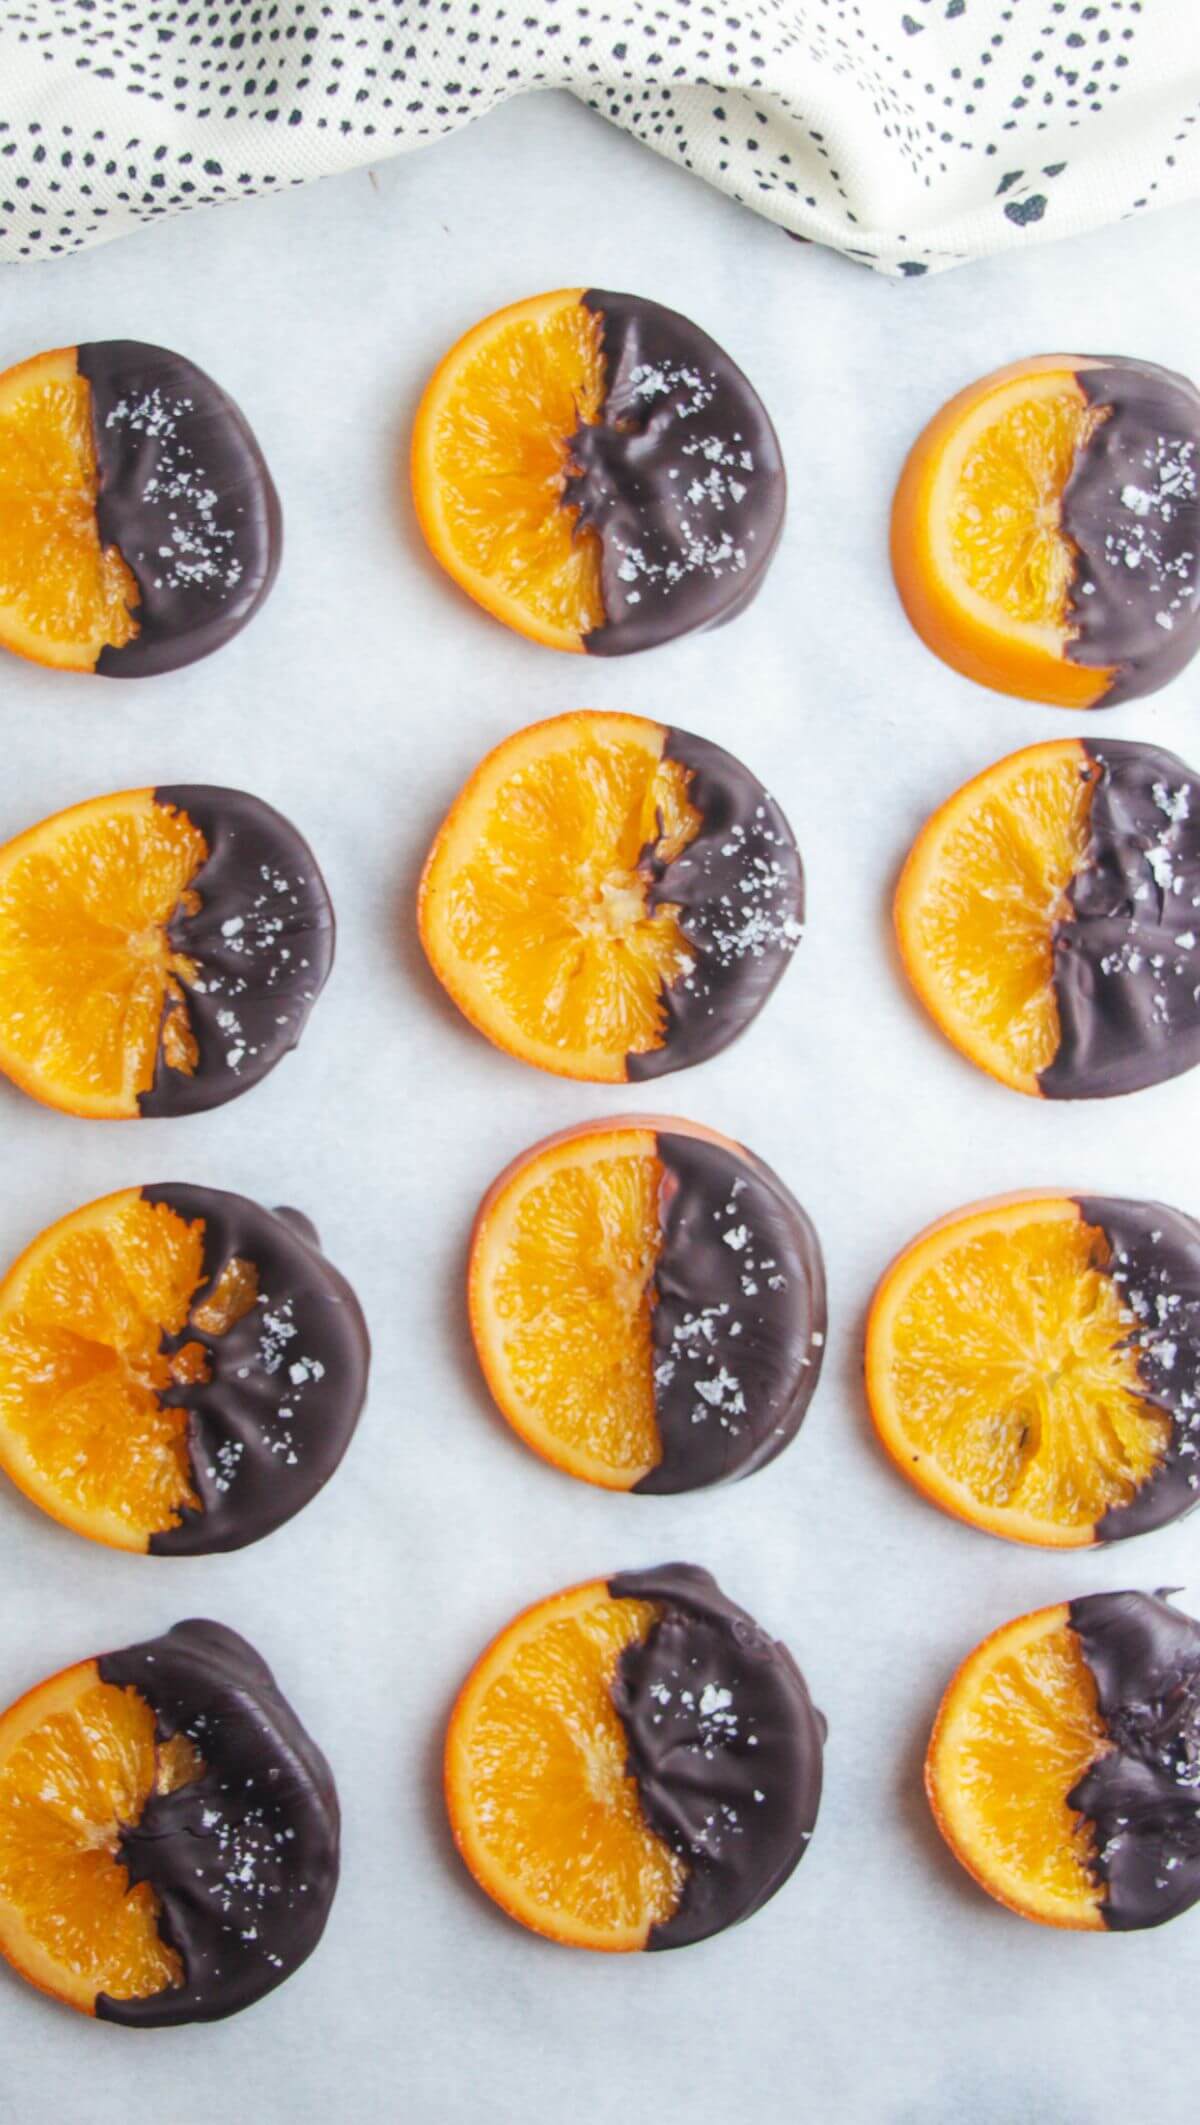 Dark chocolate dipped candied orange slices laid out on a baking paper lined tray.